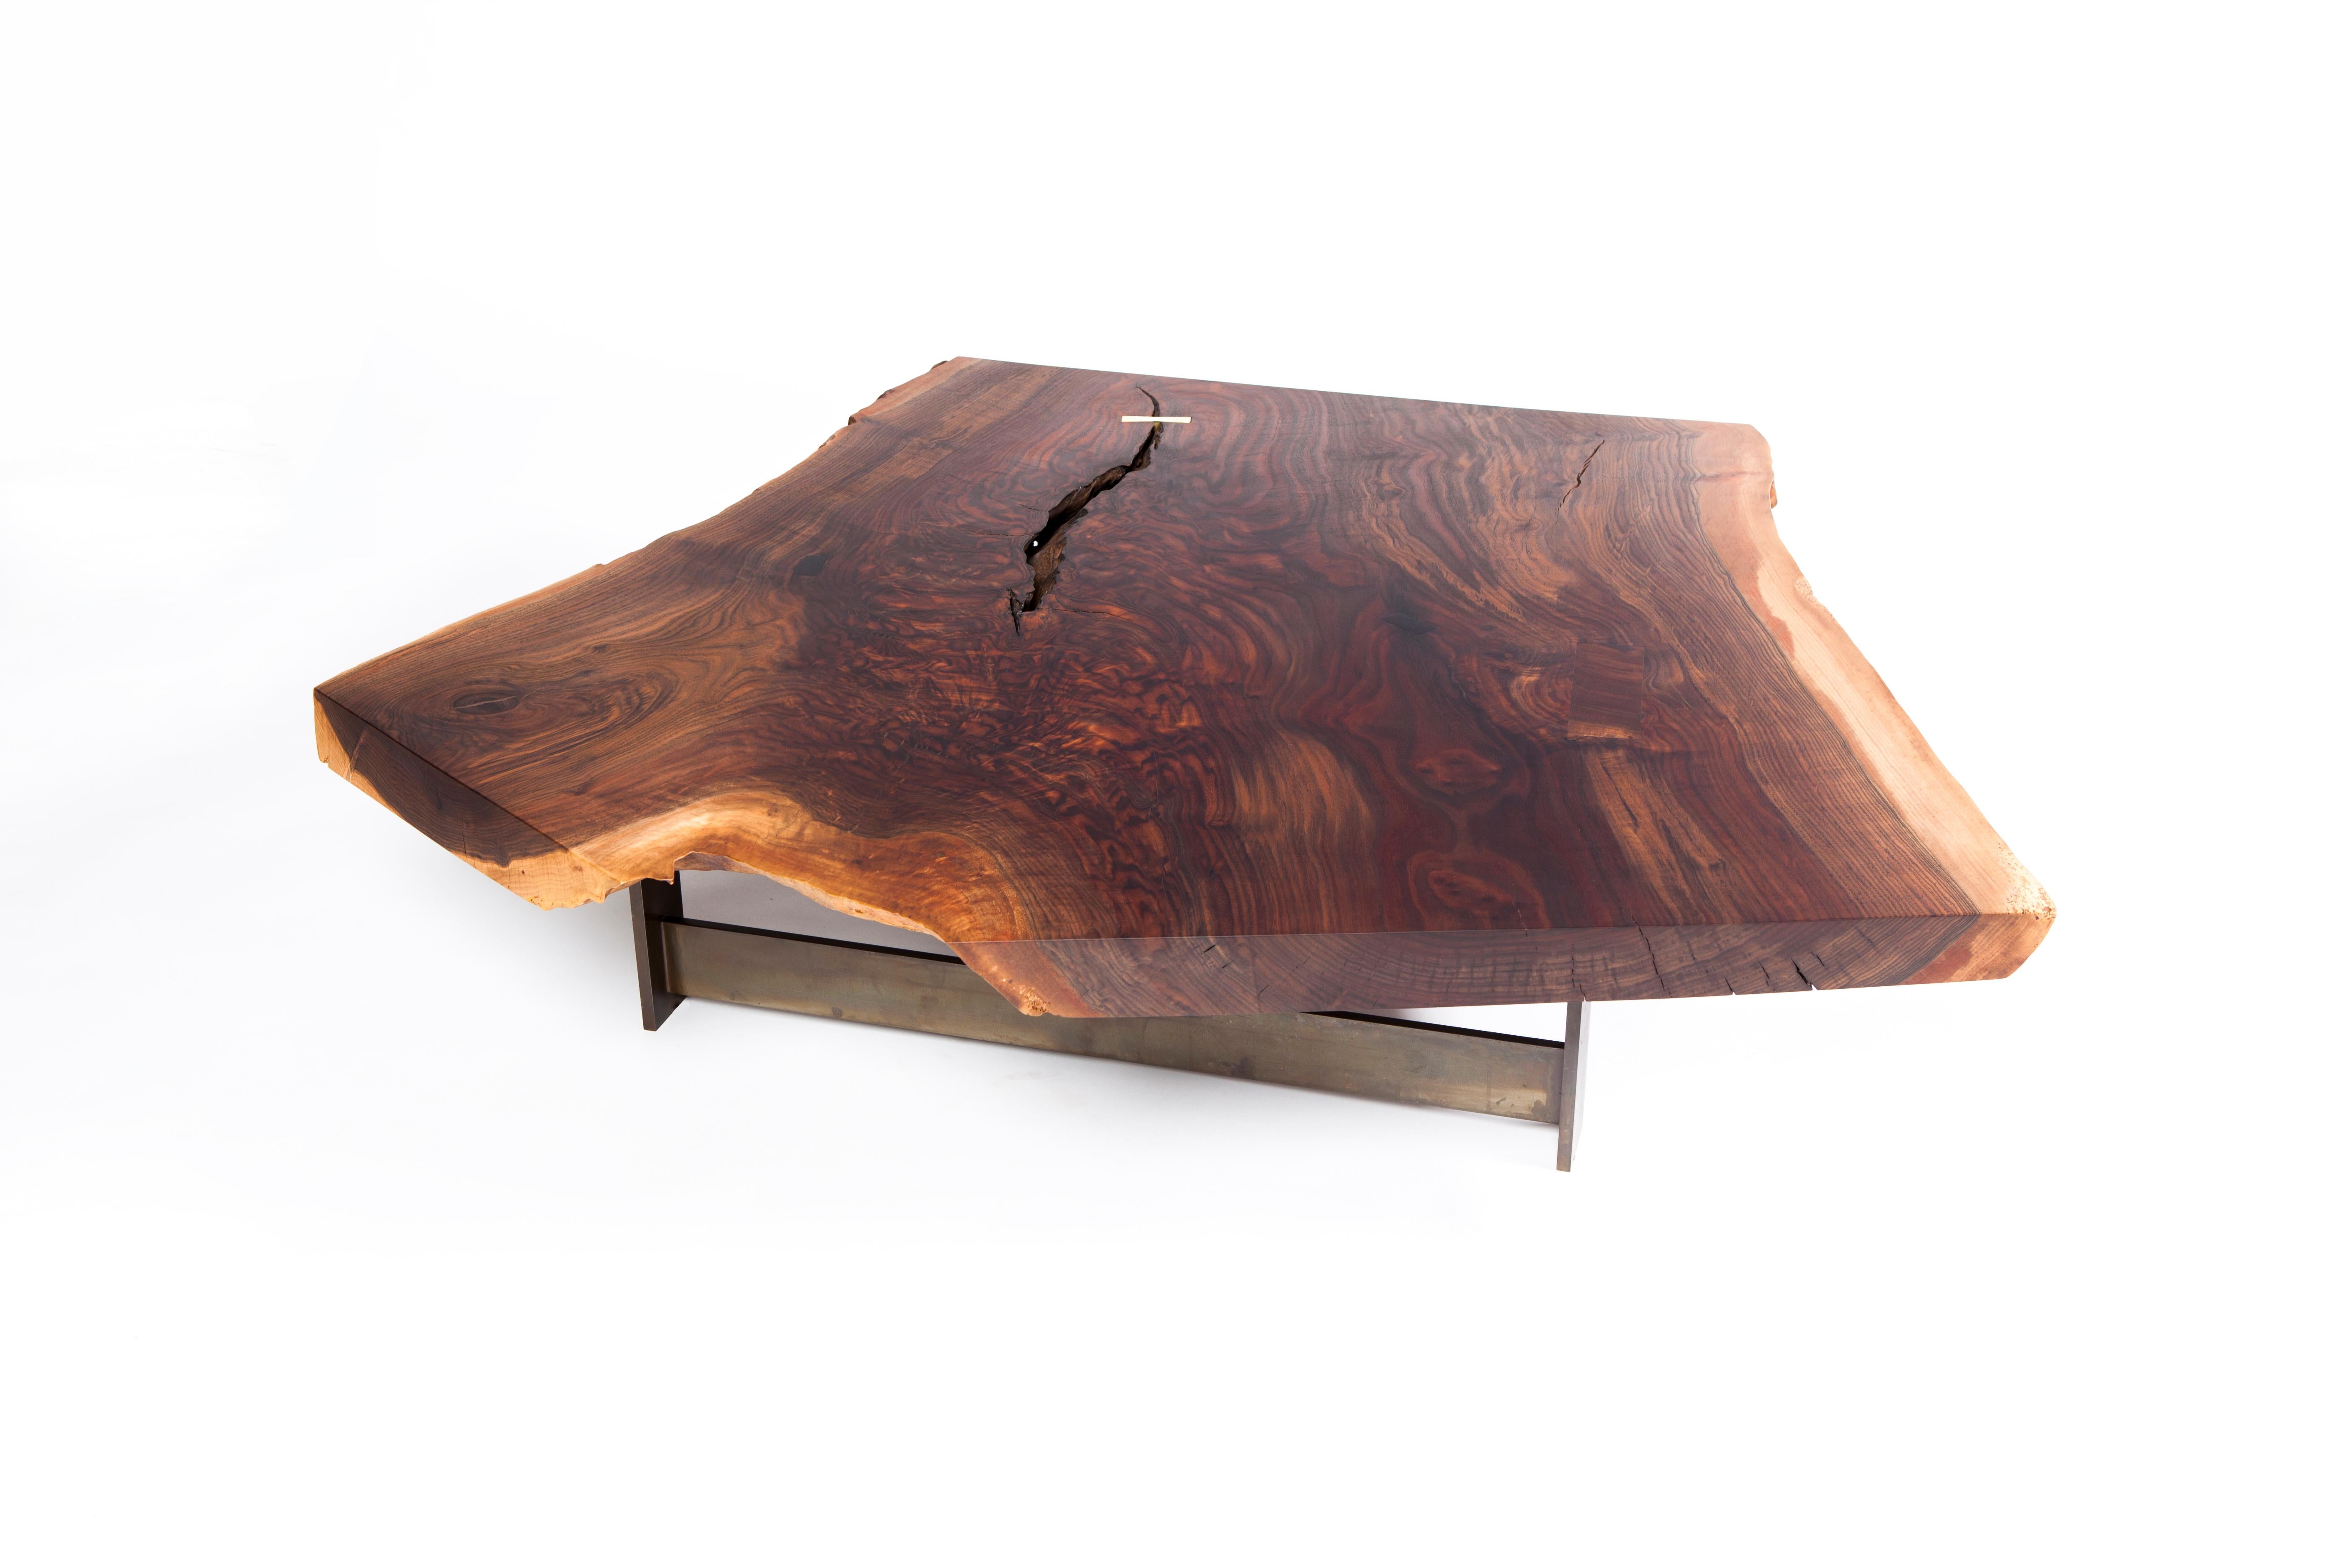 The graft coffee table by Taylor Donsker features a live edge California Claro Walnut Y-slab top which rests on his signature patinated steel T base, making the slab appear to float from certain angles. Taylor added a polished brass butterfly key to